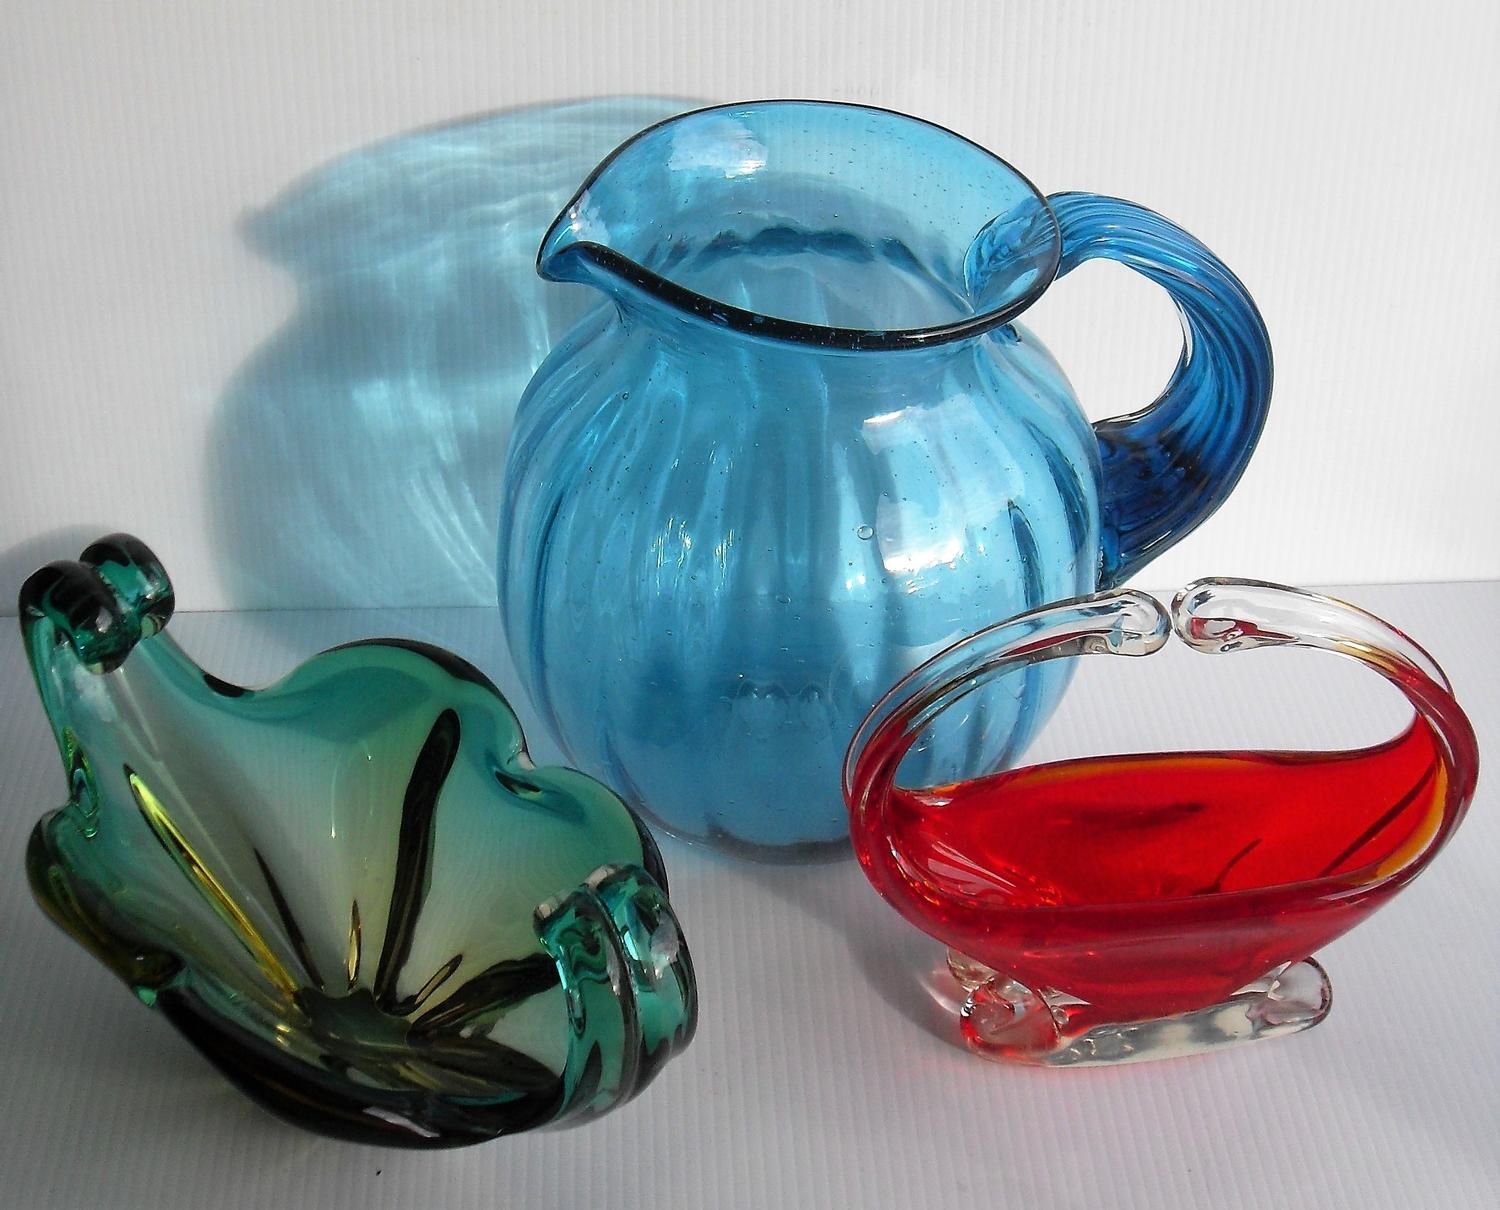 Two Murano sommerso freeform bowls, a tall vase 46 cm H and a turquoise glass vase, 23 cm H, without